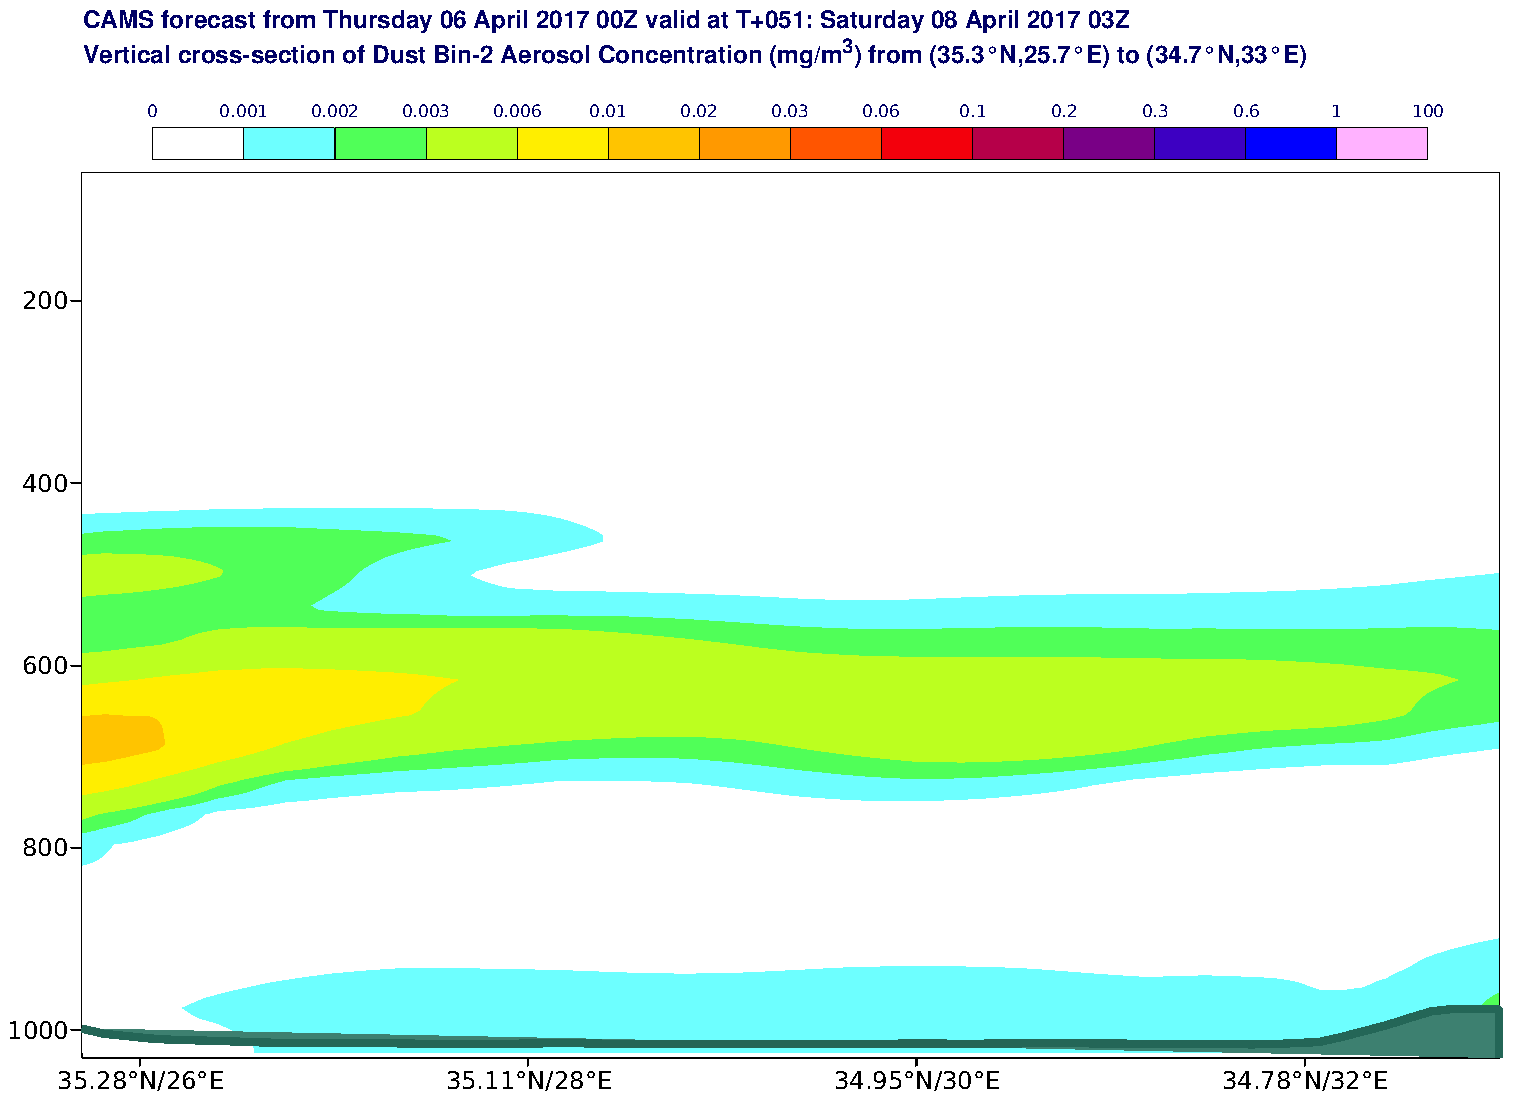 Vertical cross-section of Dust Bin-2 Aerosol Concentration (mg/m3) valid at T51 - 2017-04-08 03:00